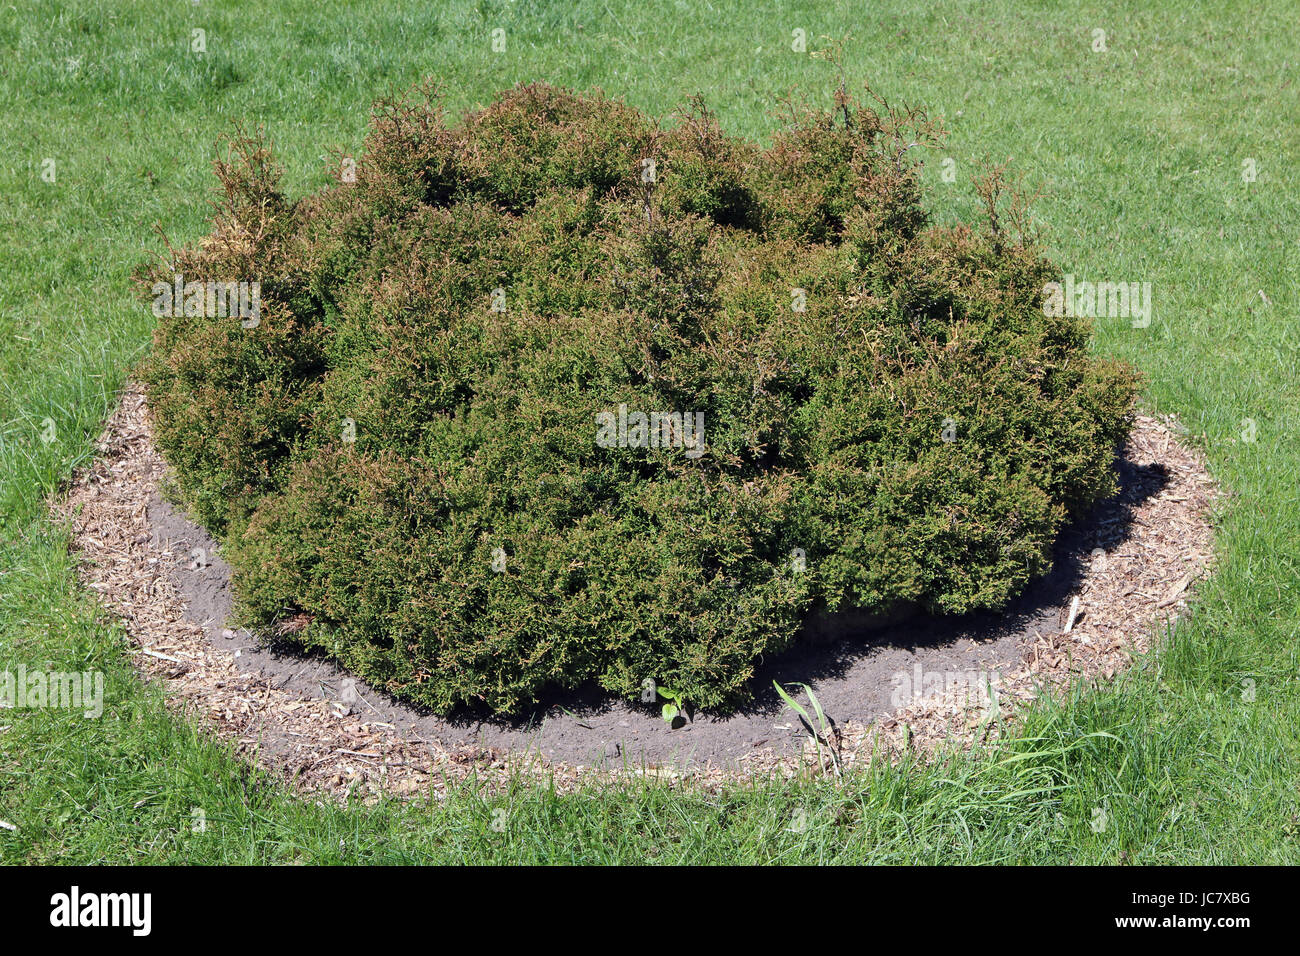 The low bush of a dwarfish coniferous plant  - juniper-  grows on a green lawn. Sunny sprind day landscape Stock Photo